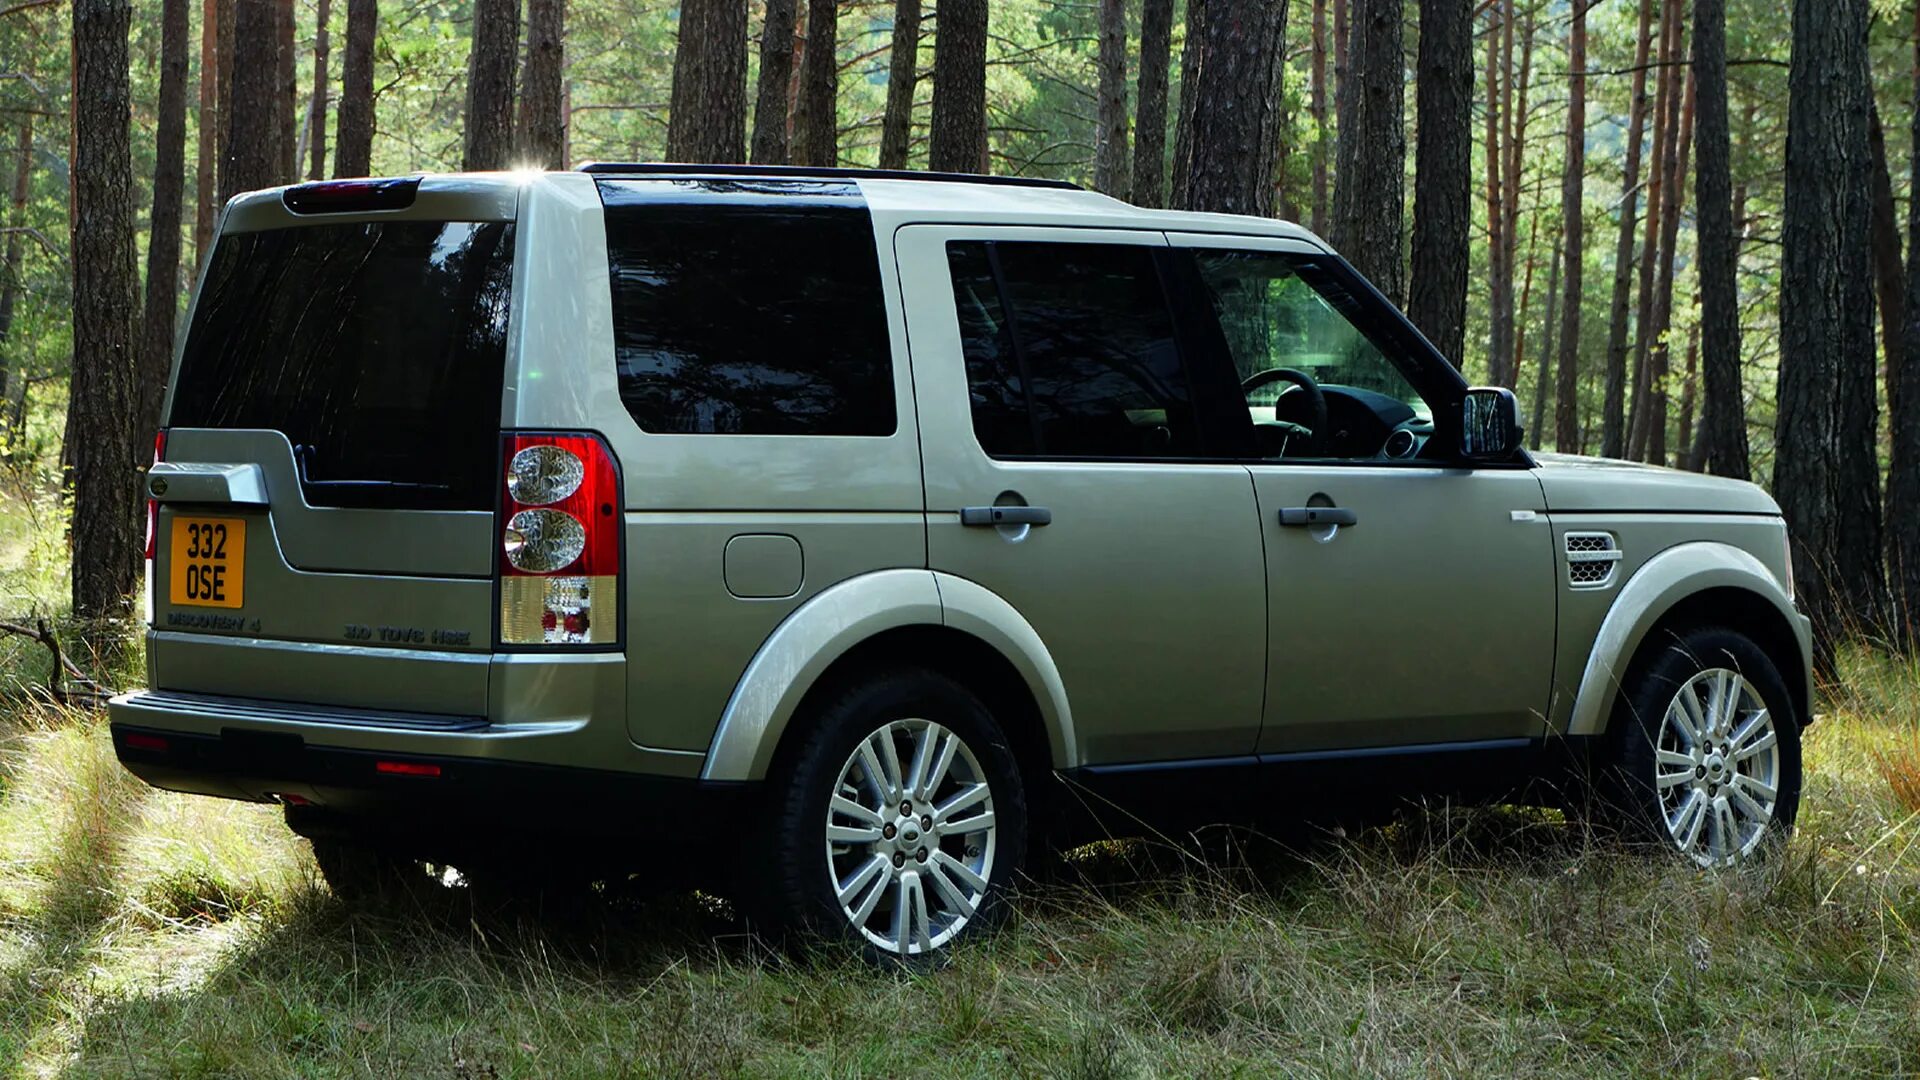 Land Rover Discovery 4. Ленд Ровер Дискавери 4 2009. Лэнд ровыер Дискавери 4. Ленд Ровер Дискавери 4 2014. Рендж дискавери 4